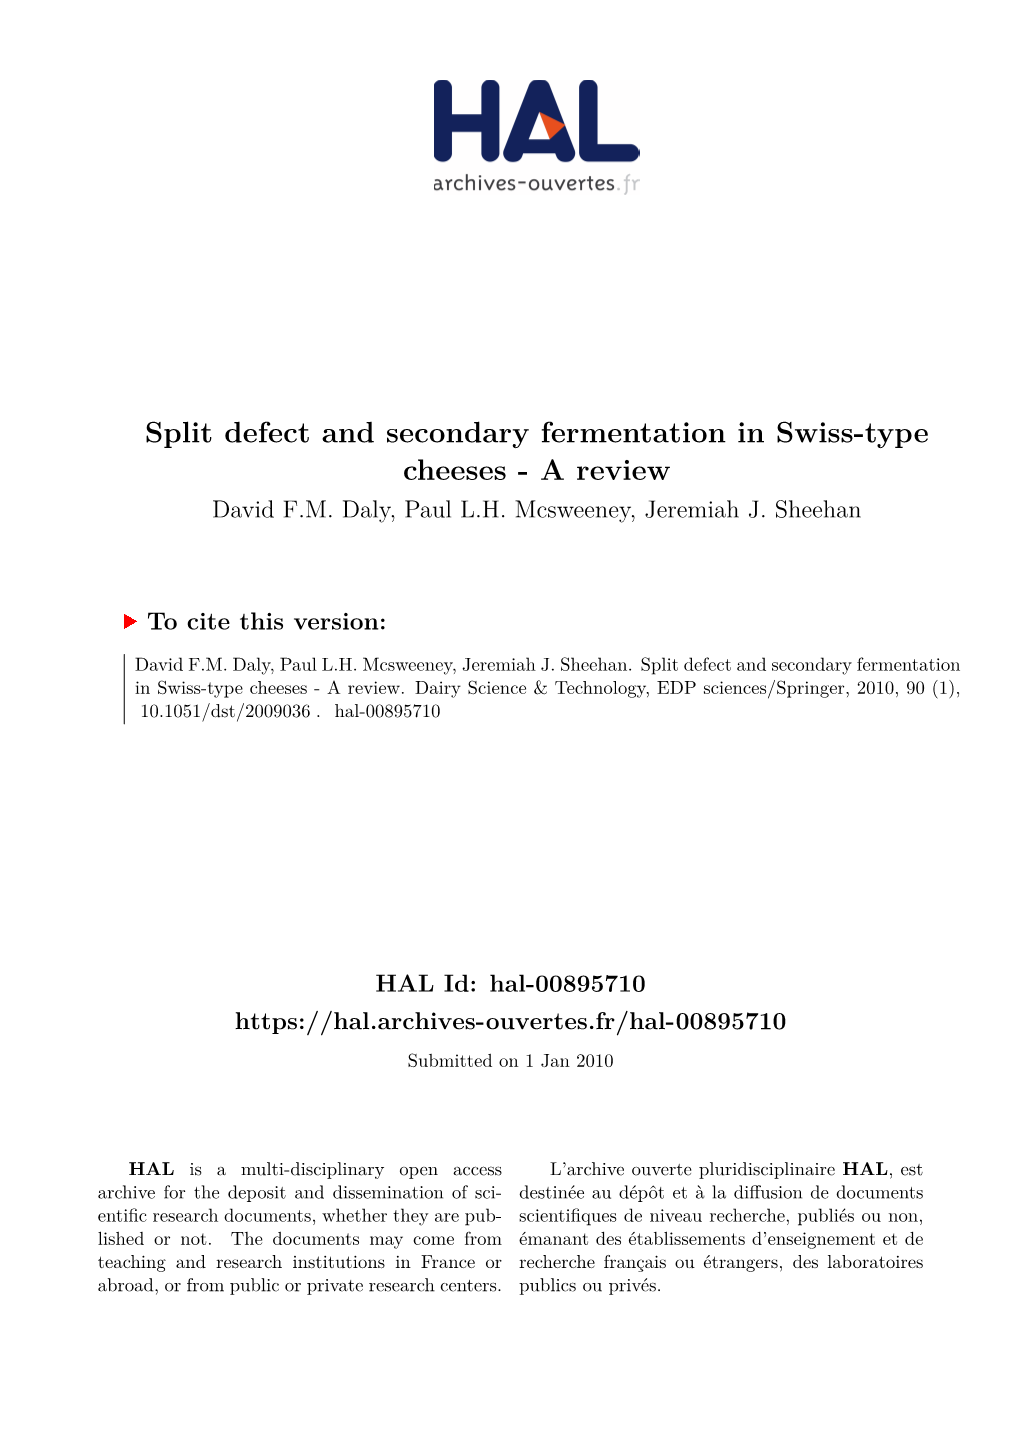 Split Defect and Secondary Fermentation in Swiss-Type Cheeses - a Review David F.M